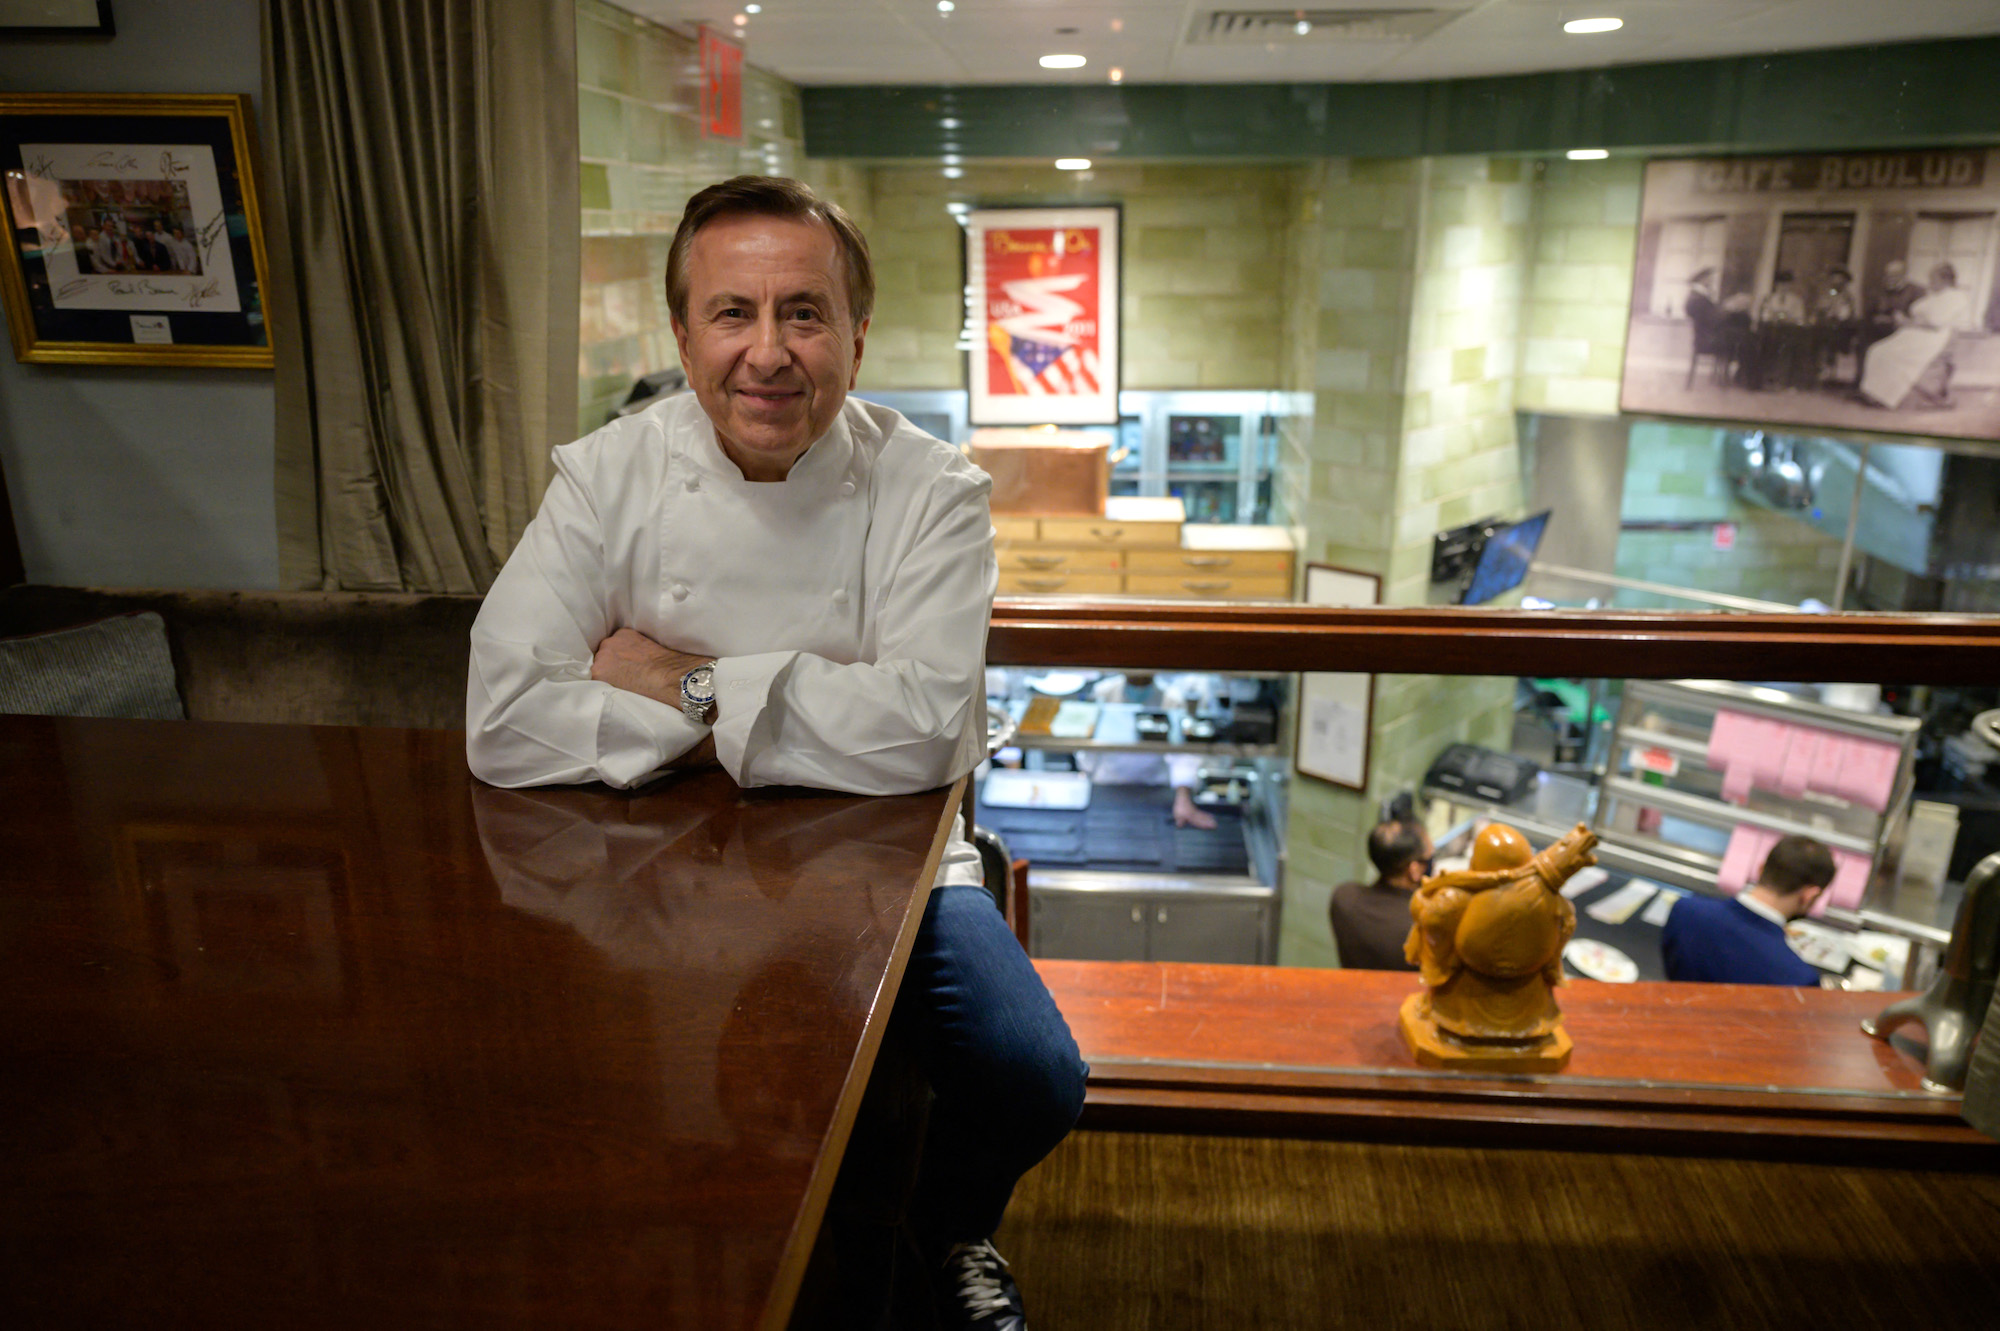 French chef and restaurateur Daniel Boulud poses for a photo in the office of his restaurant 'Daniel', in Manhattan, New York City on November 19, 2021